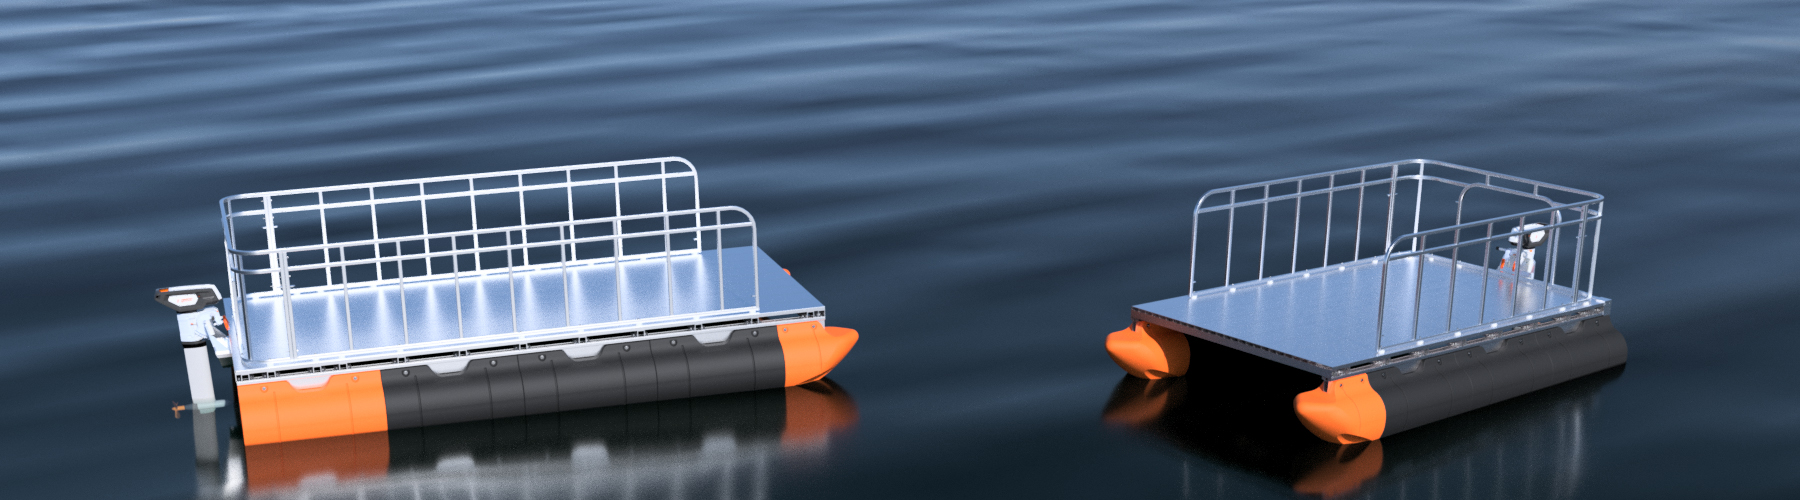 This $950 Kit Lets You Build Your Own Mini Boat at Home